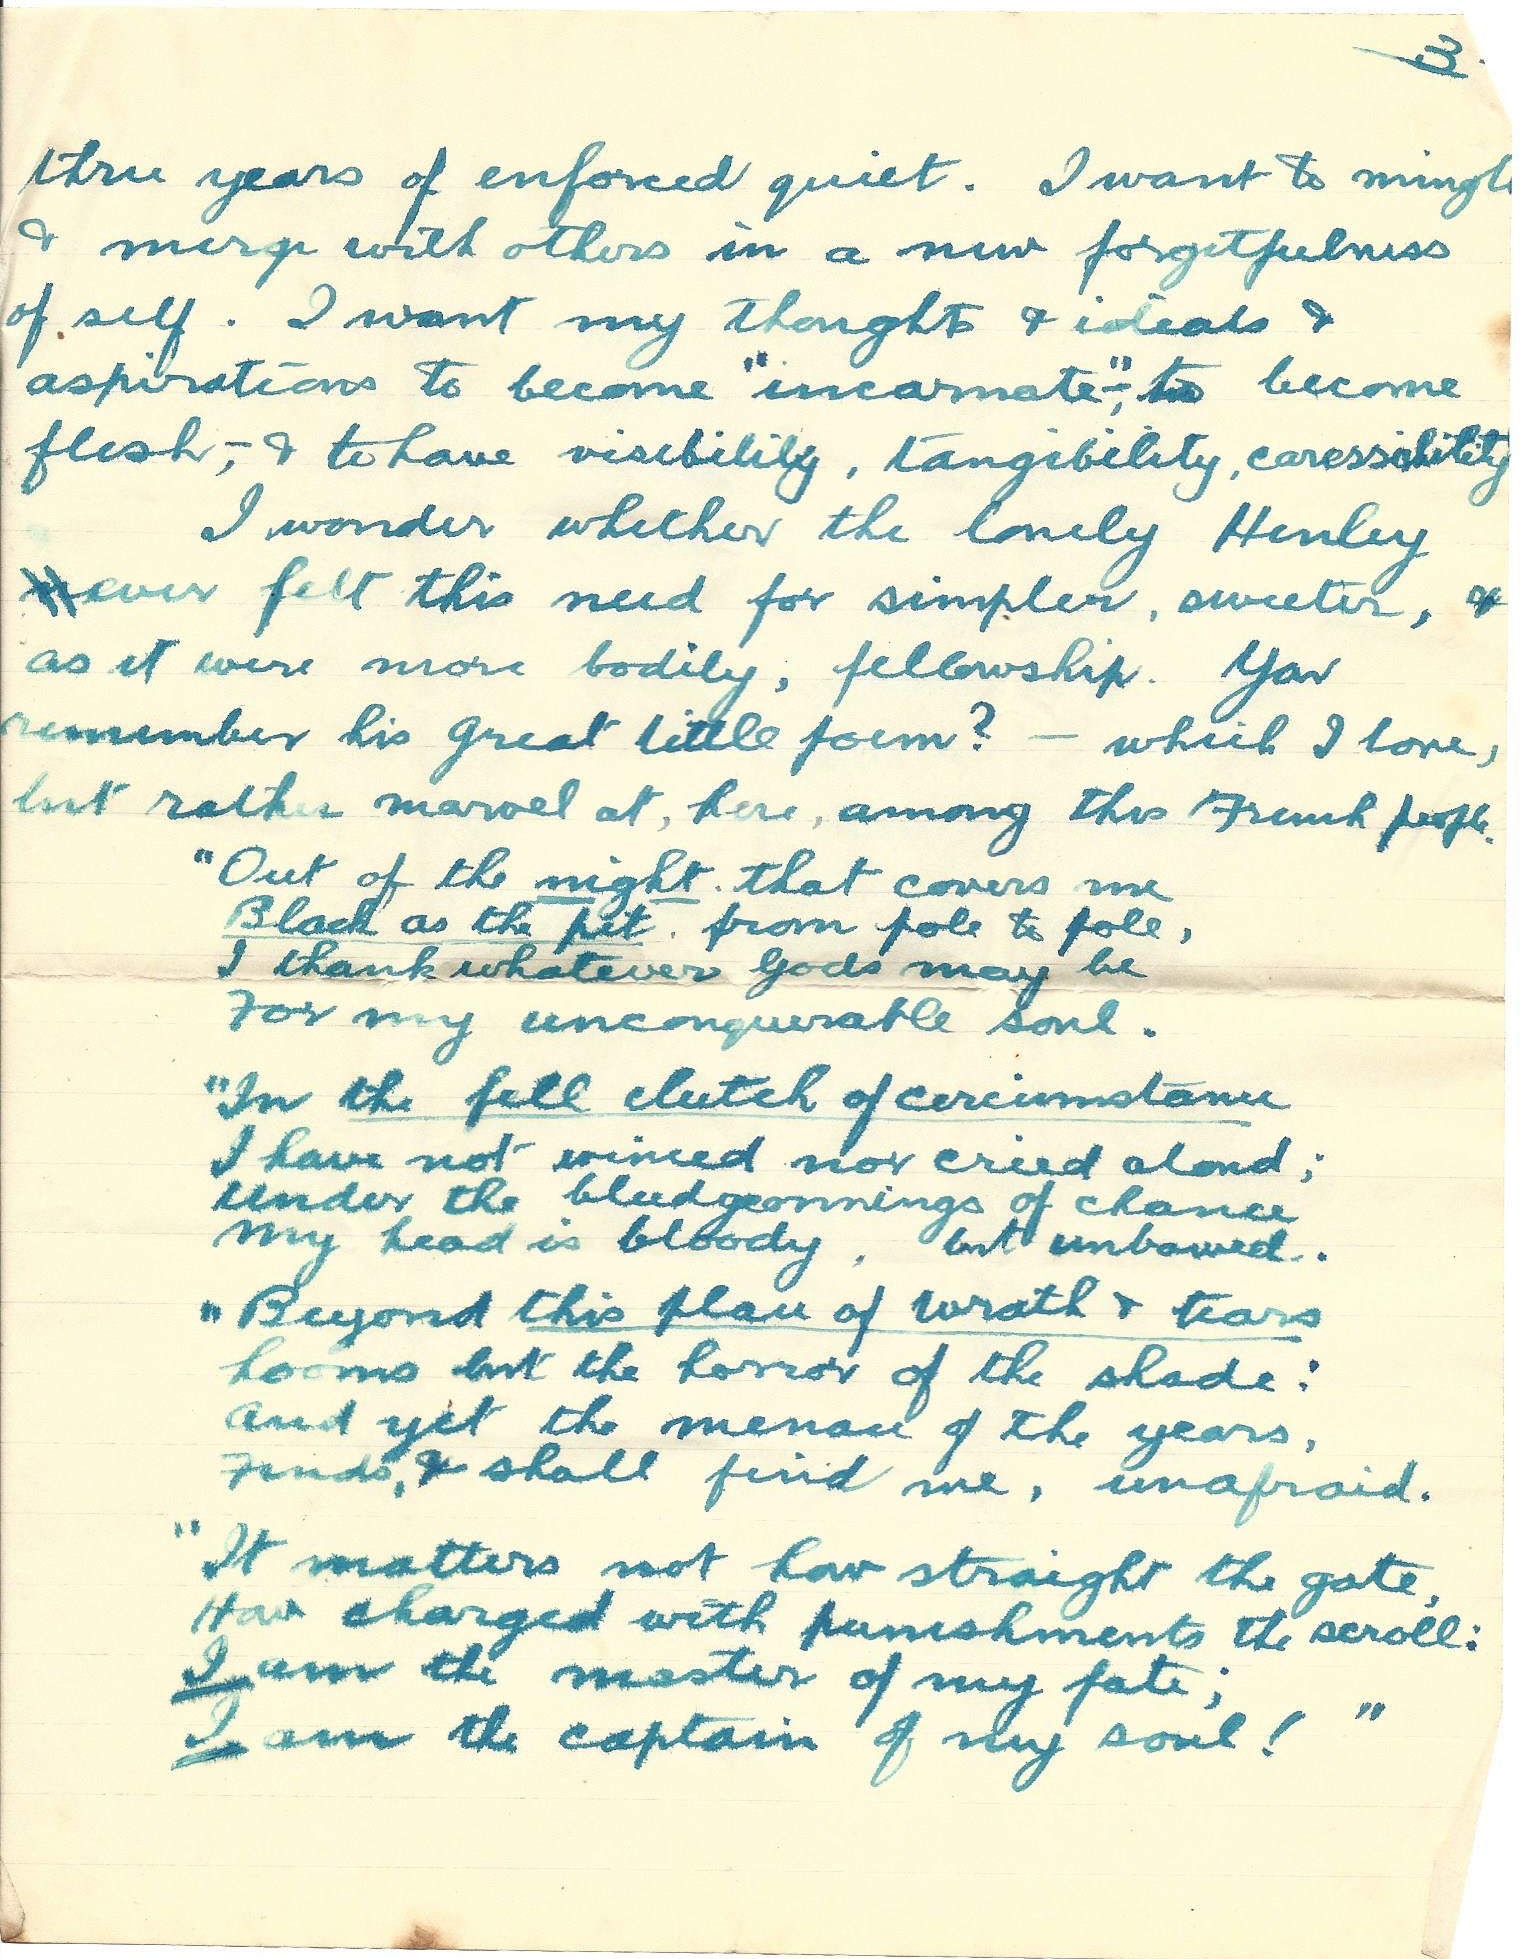 1919-08-19 p3 Donald Bearman letter to his father